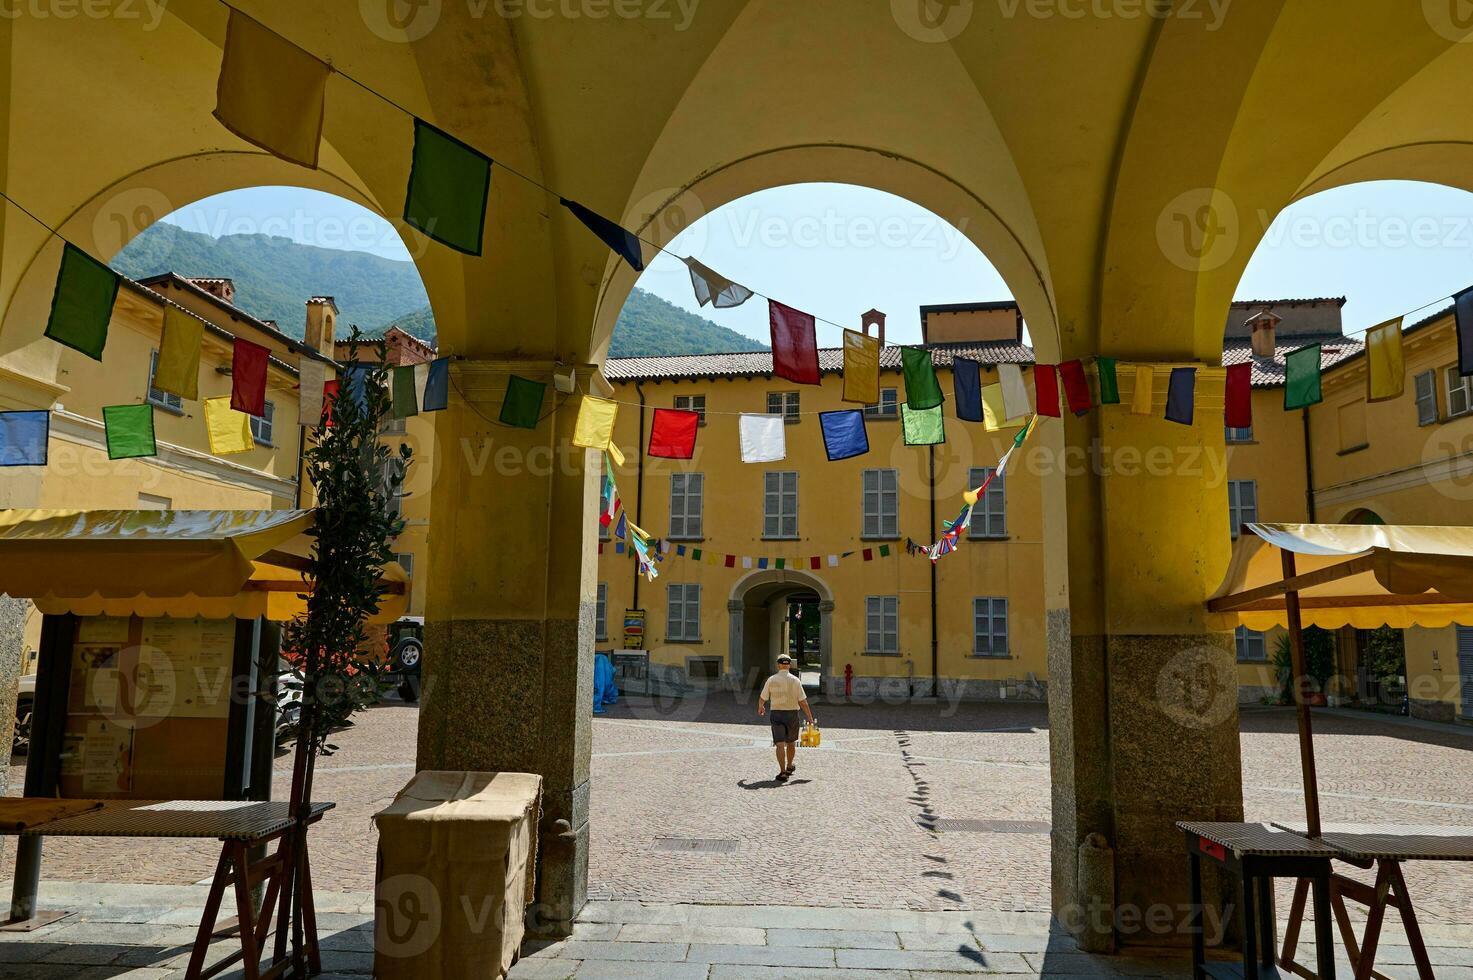 Courtyard alley in medieval Italian town, decorated with colorful flags for a festival. Travel and tourism concept photo